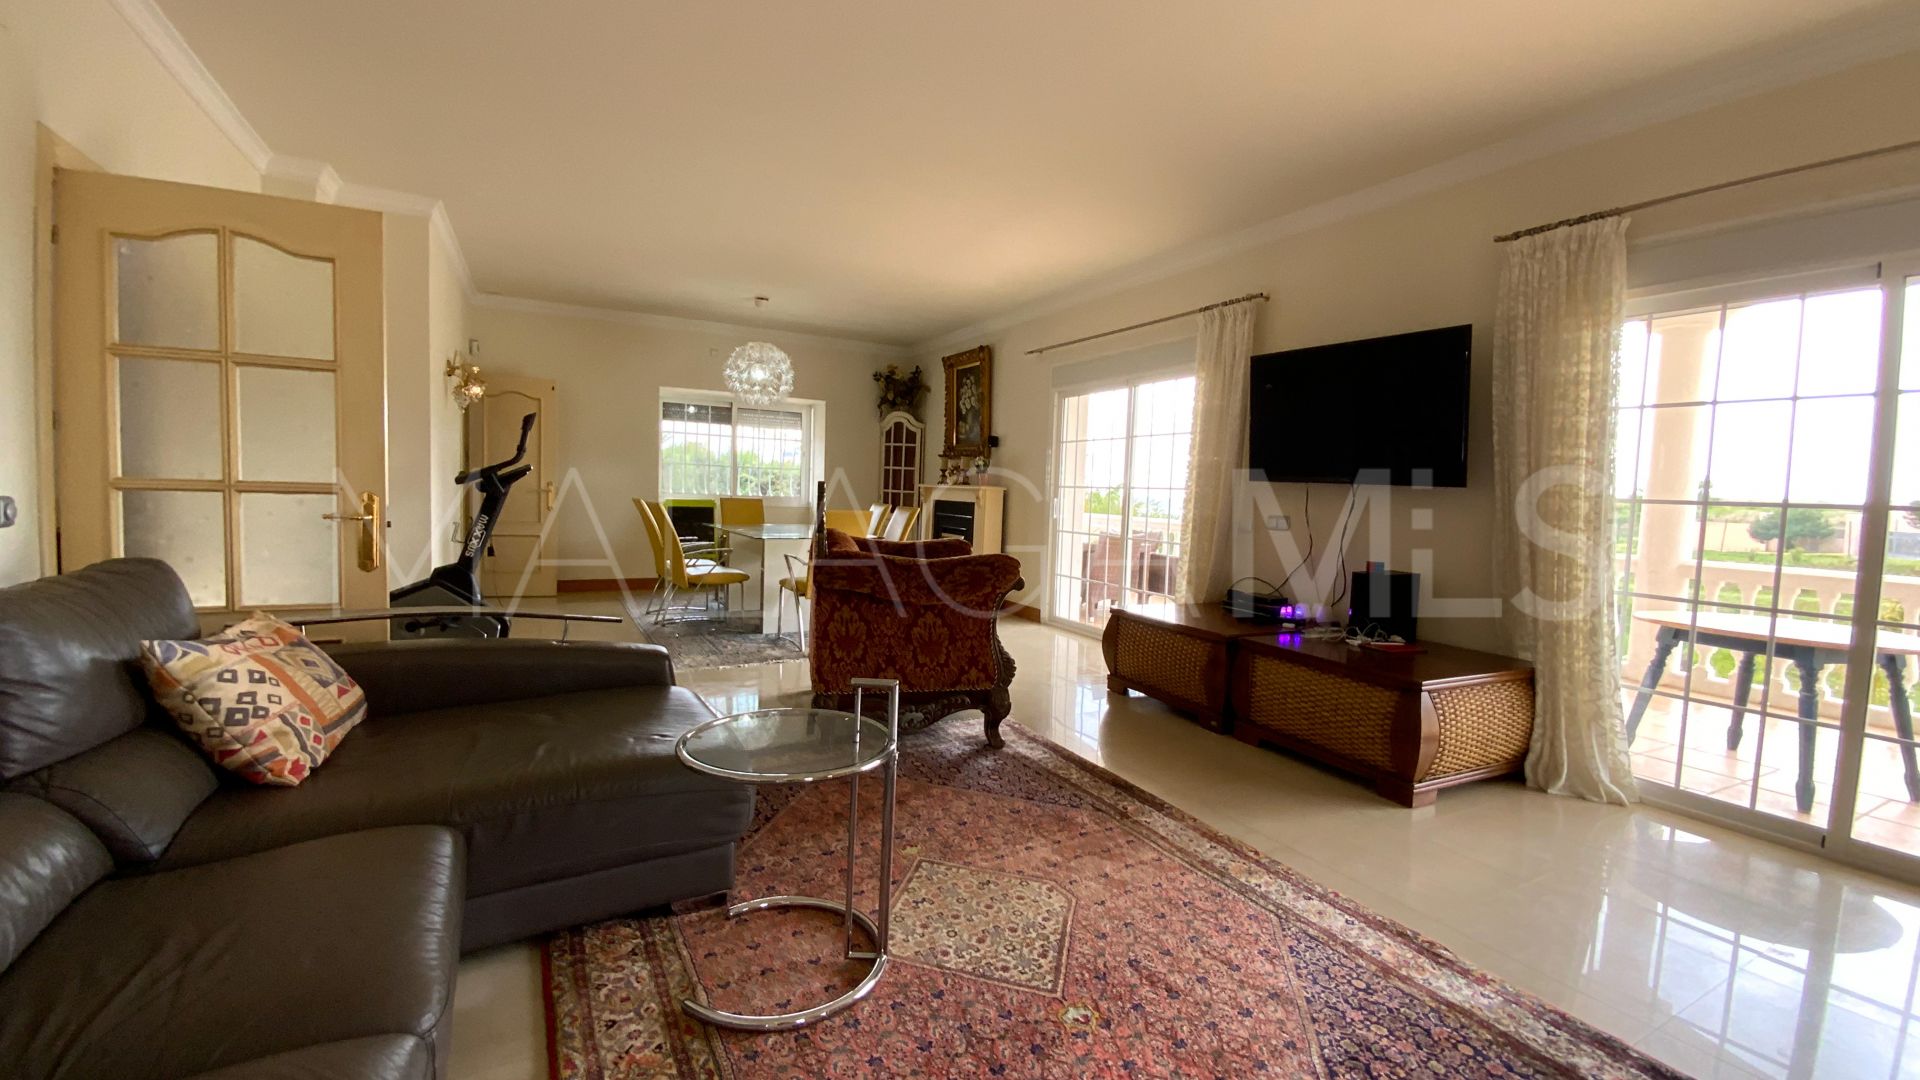 Villa for sale with 5 bedrooms in Mijas Golf